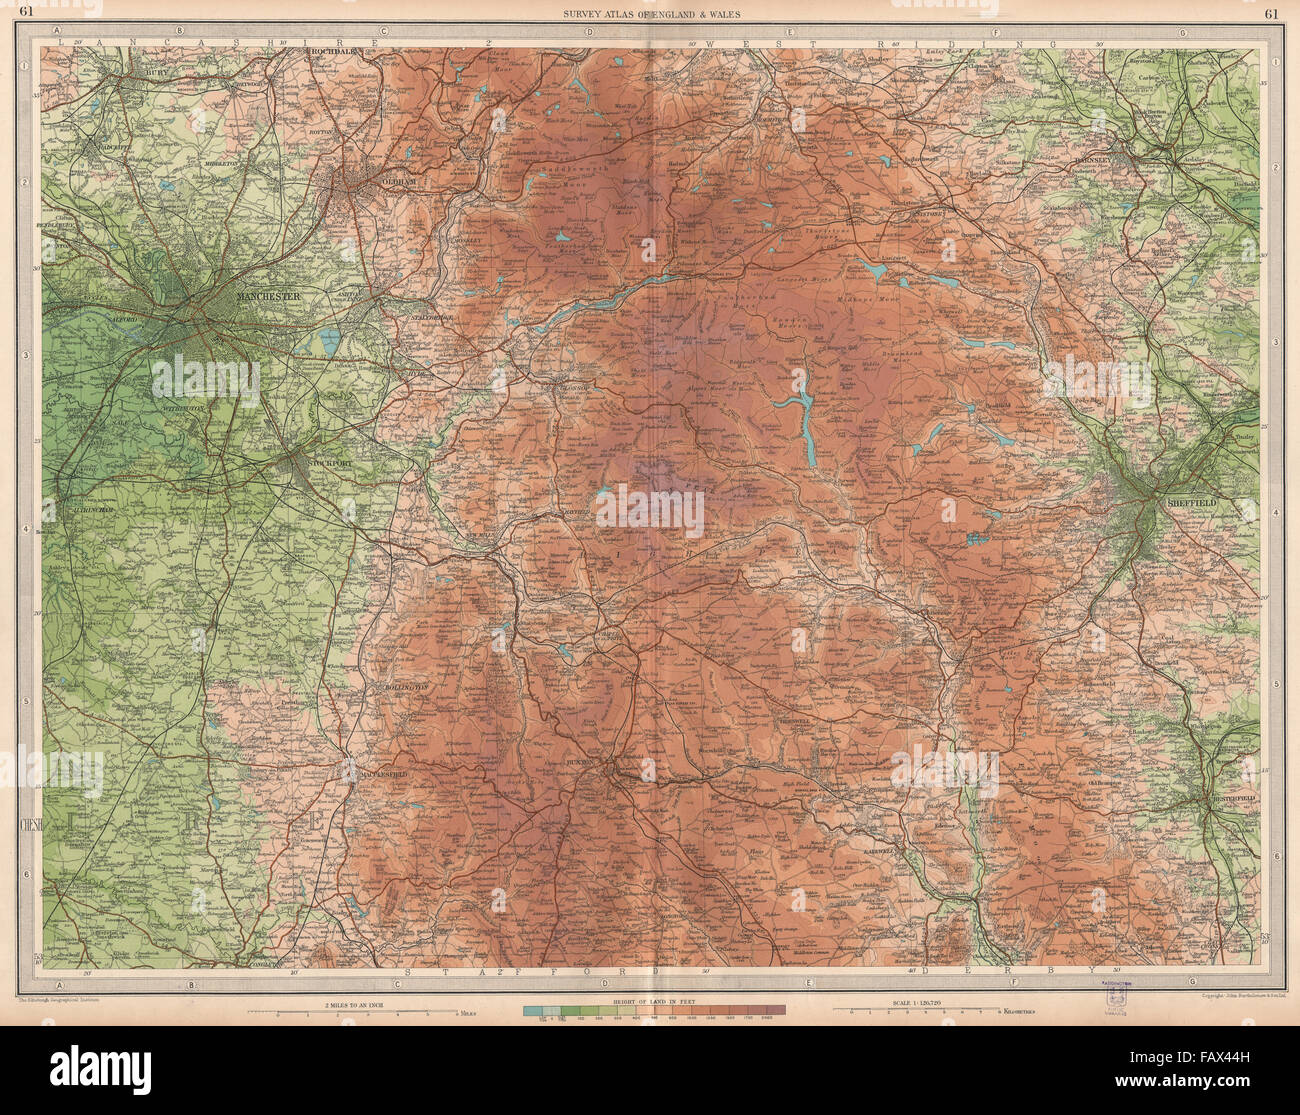 Il Peak District: Manchester Sheffield Chesterfield Ches Yorks Derbys, 1939 Mappa Foto Stock